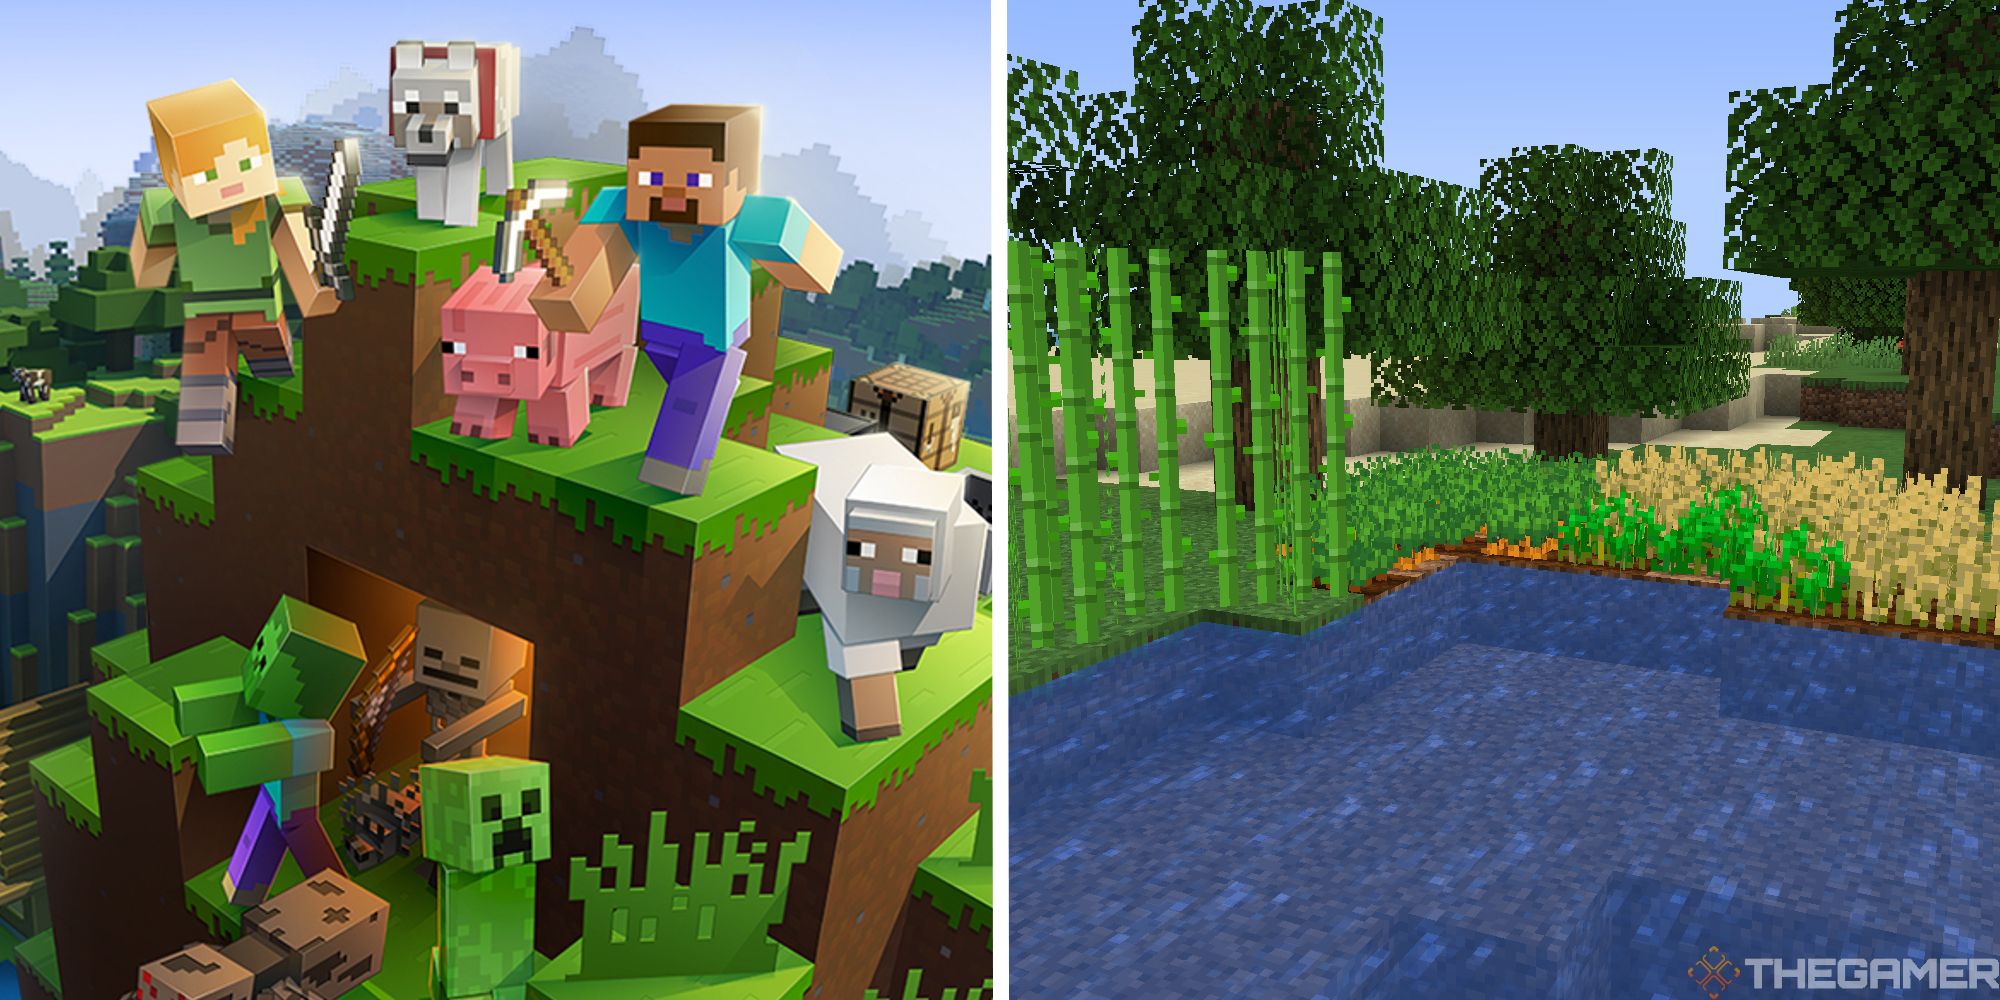 split image showing minecraft promotional art next to image of sugarcane, wheat and carrots growing